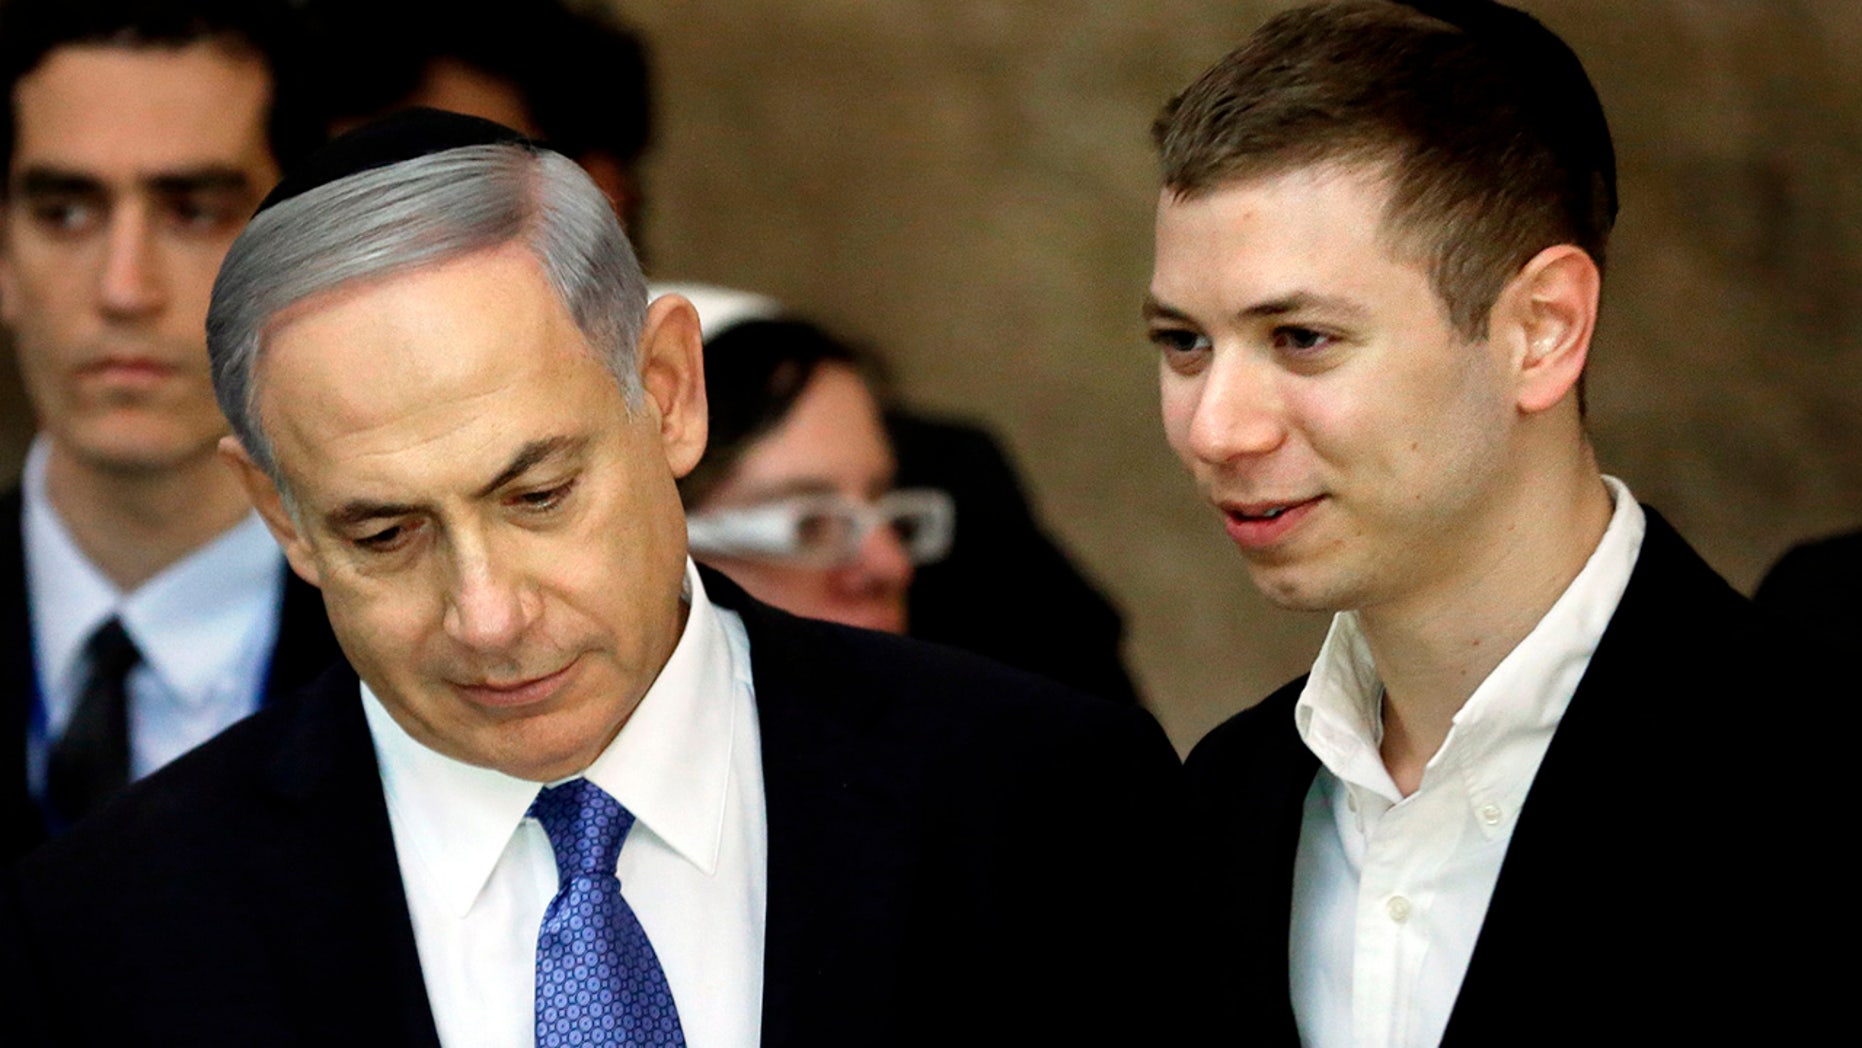 Israeli PM Netanyahu’s son booted from Facebook after post calling for